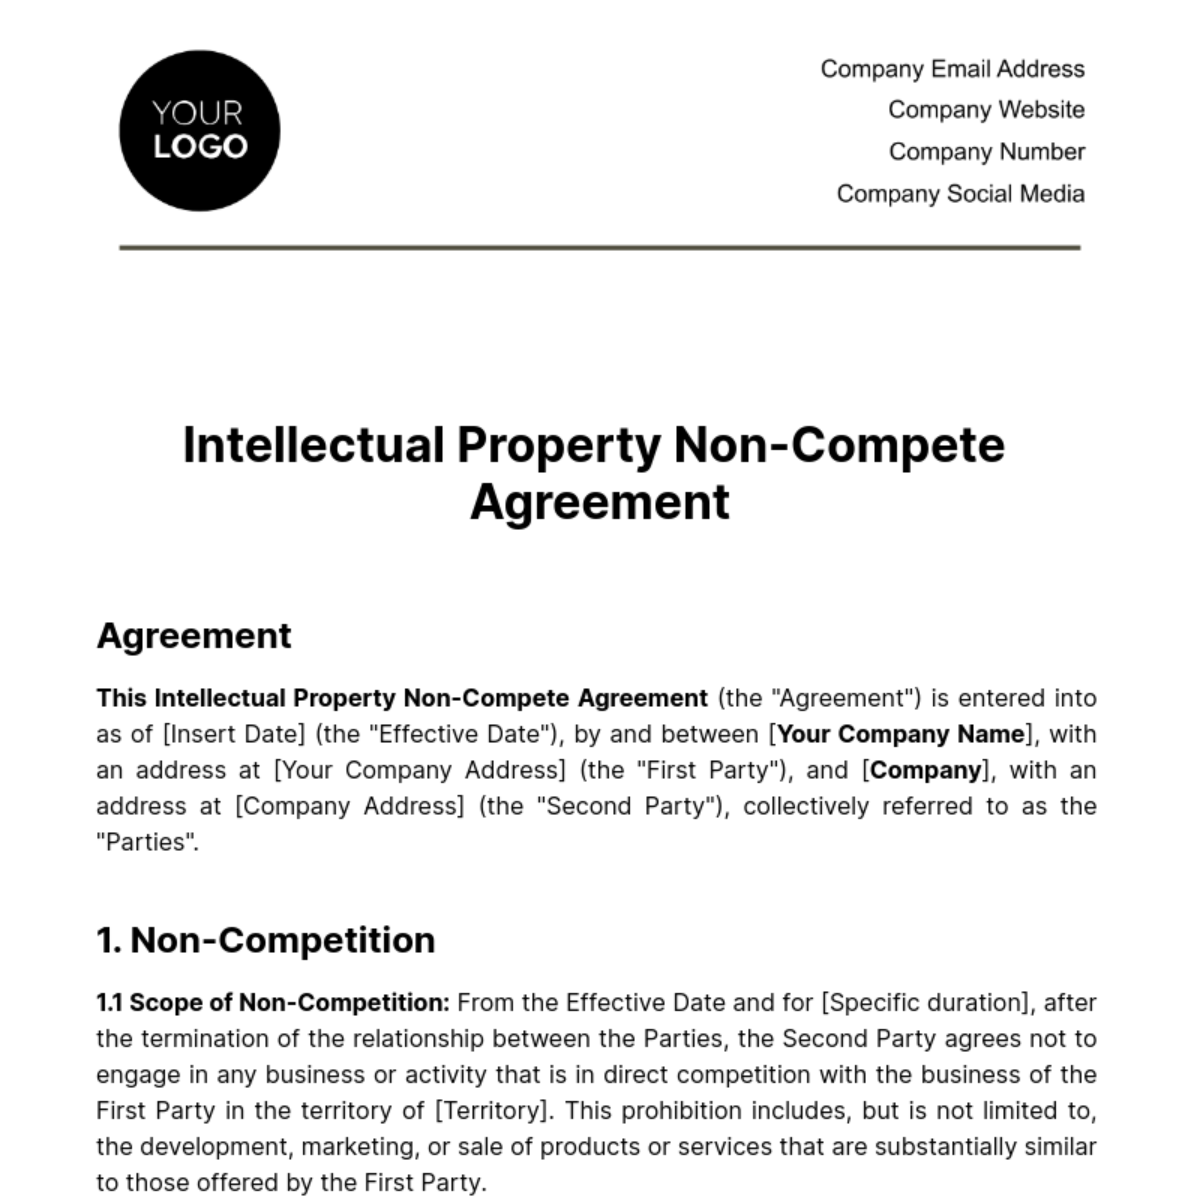 Legal Intellectual Property Non-Compete Agreement Template